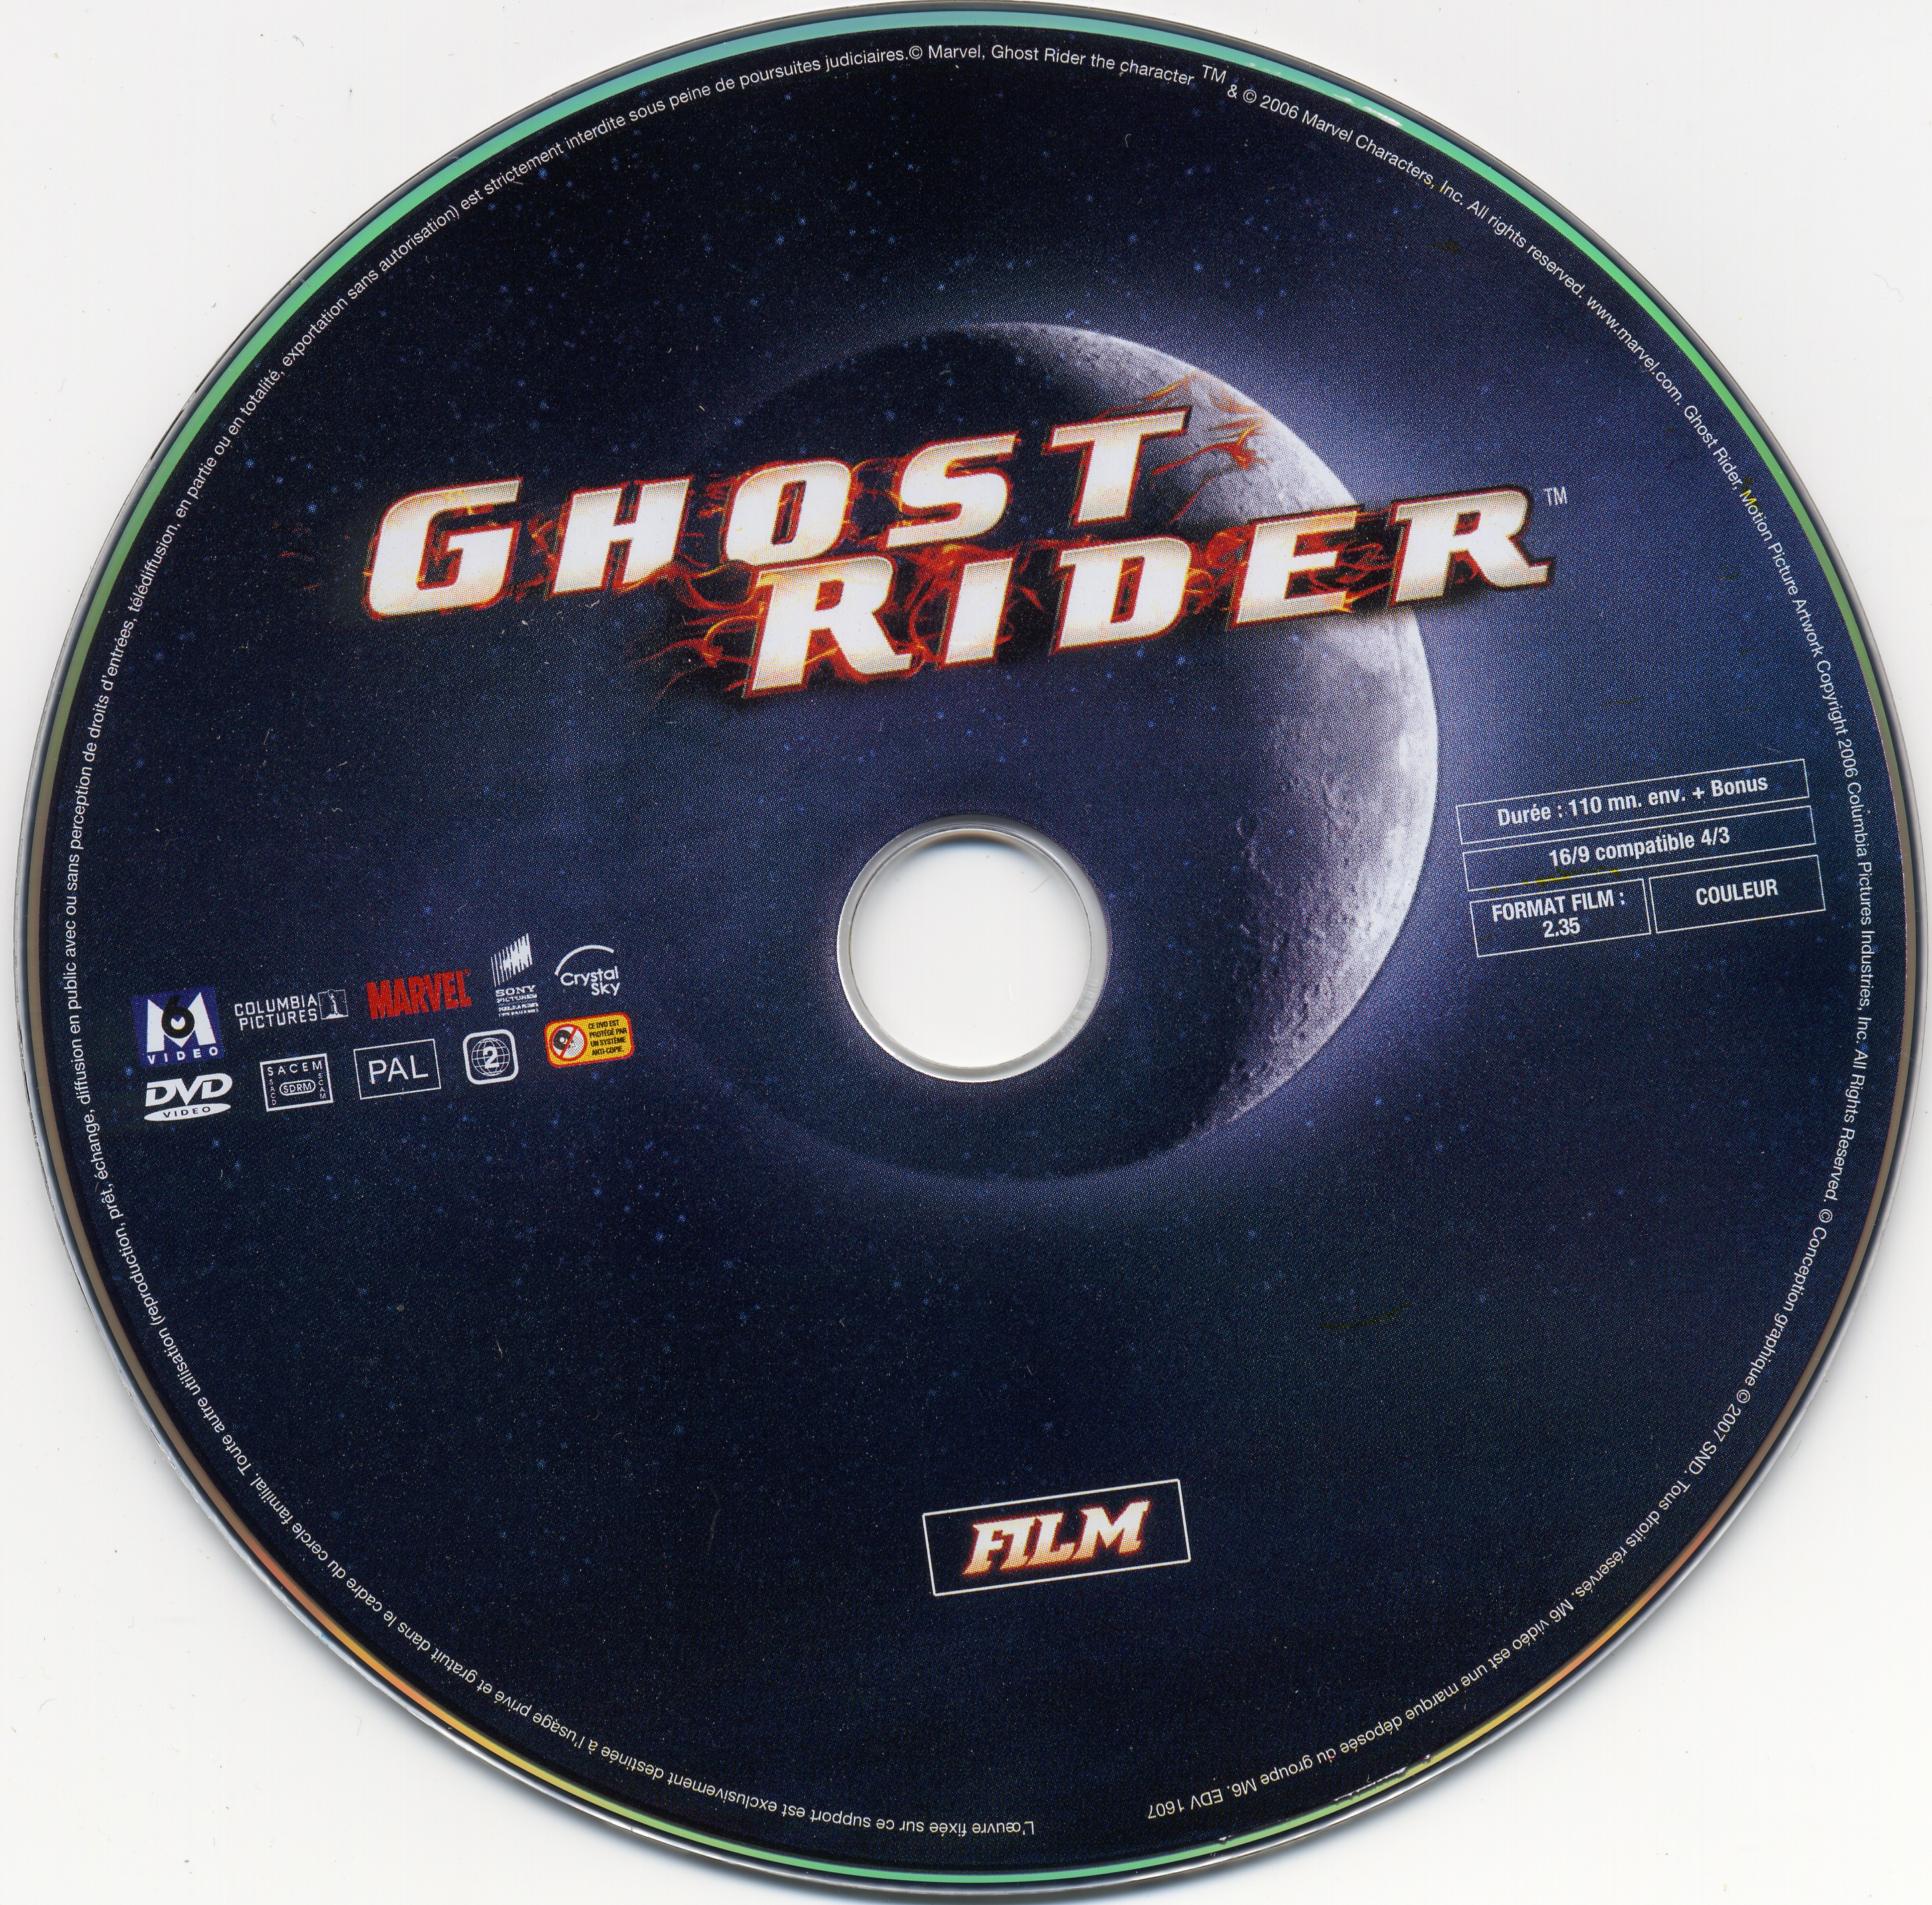 Ghost rider DISC 1